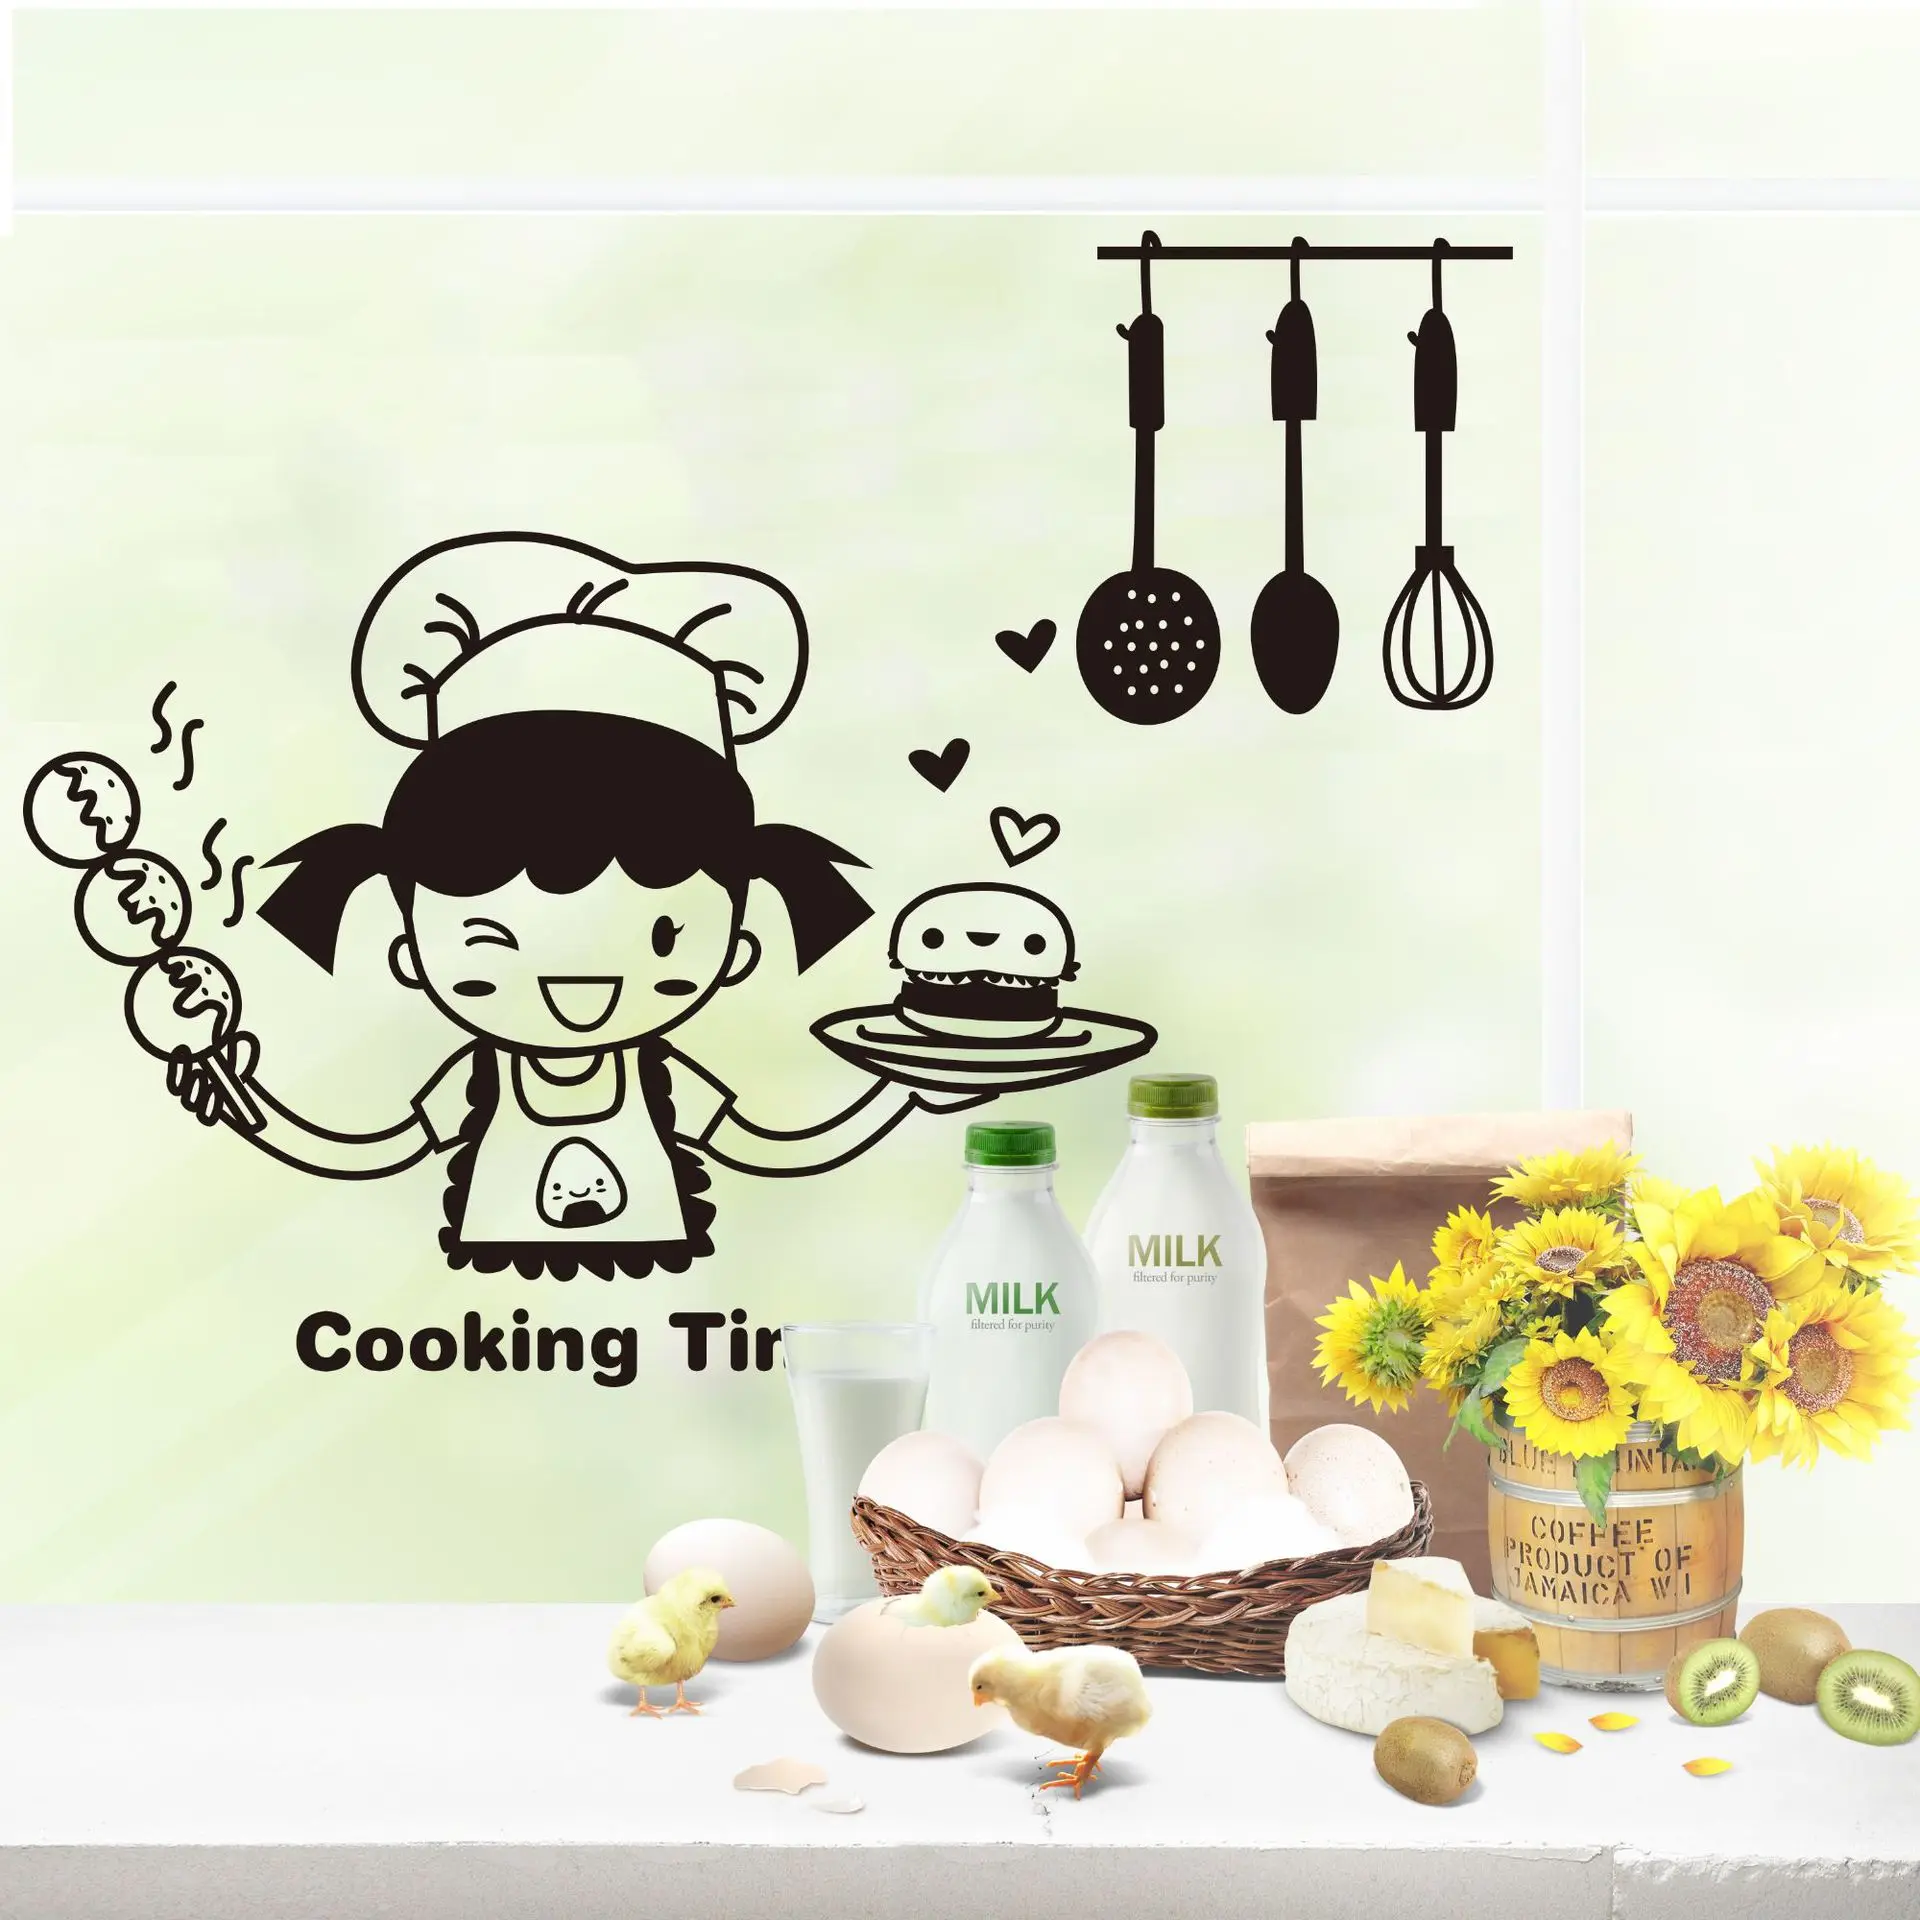 Cuisine Coffee Vinyl Wall Stickers For Kitchen Room Home Decoration Accessories Mural Decor Wallpaper wallstickers